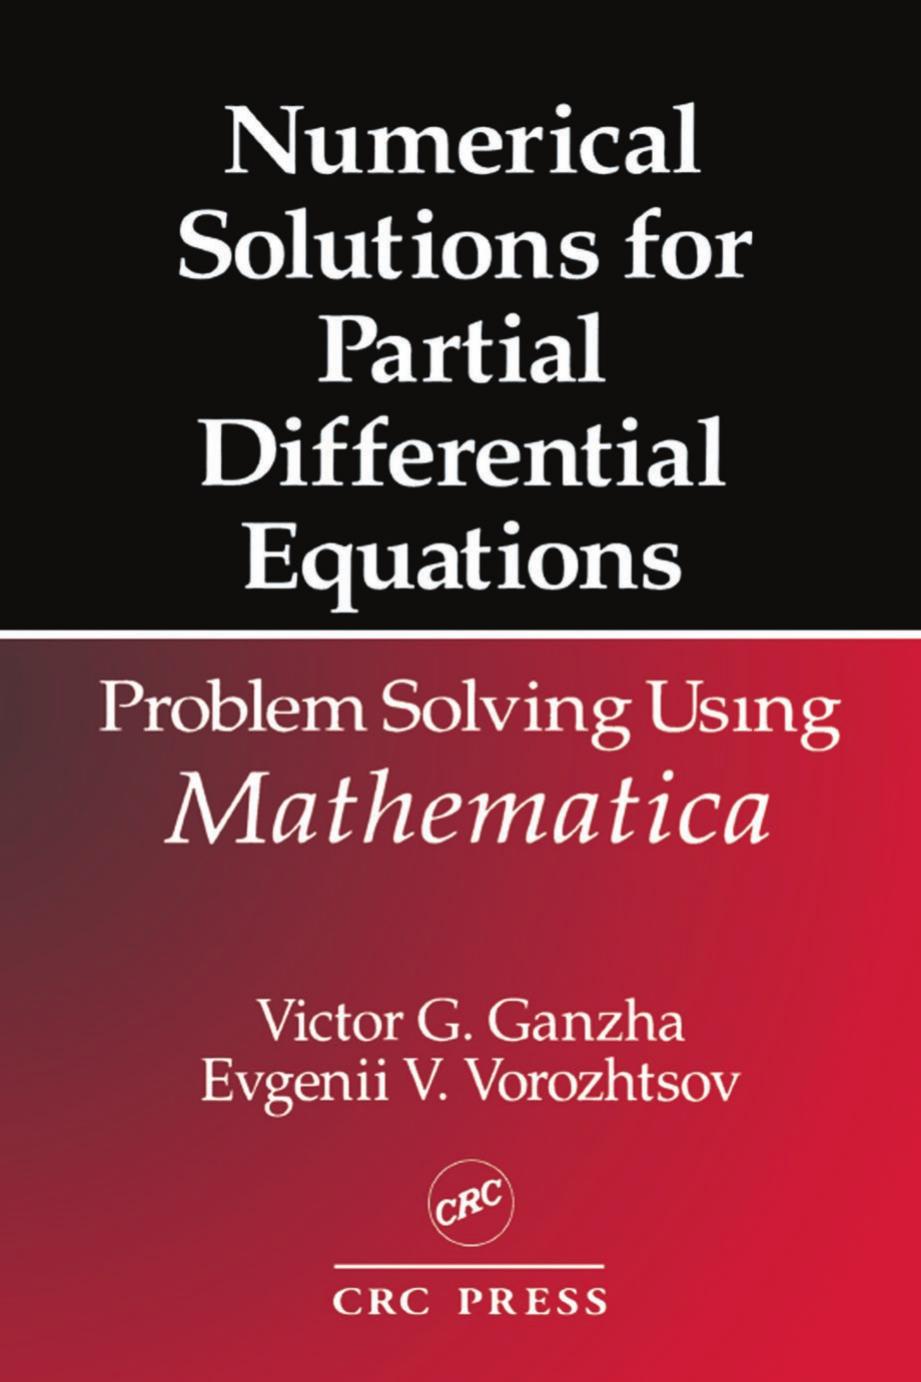 Numerical Solutions for Partial Differential Equations: Problem Solving using Mathematica®